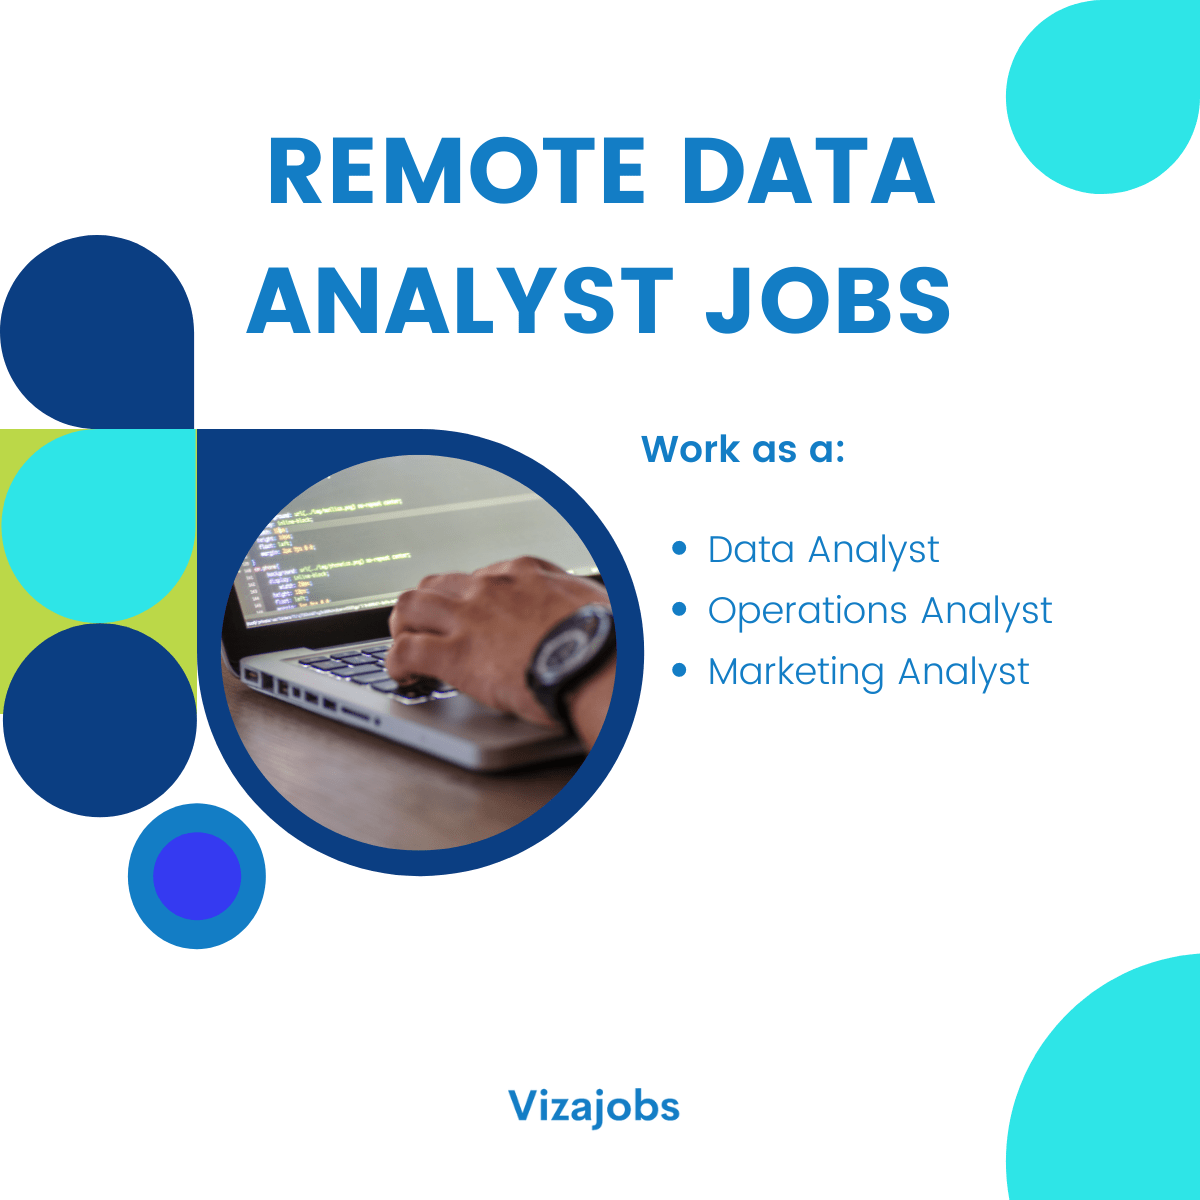 Remote Data Analyst Jobs Can I Work Remotely?